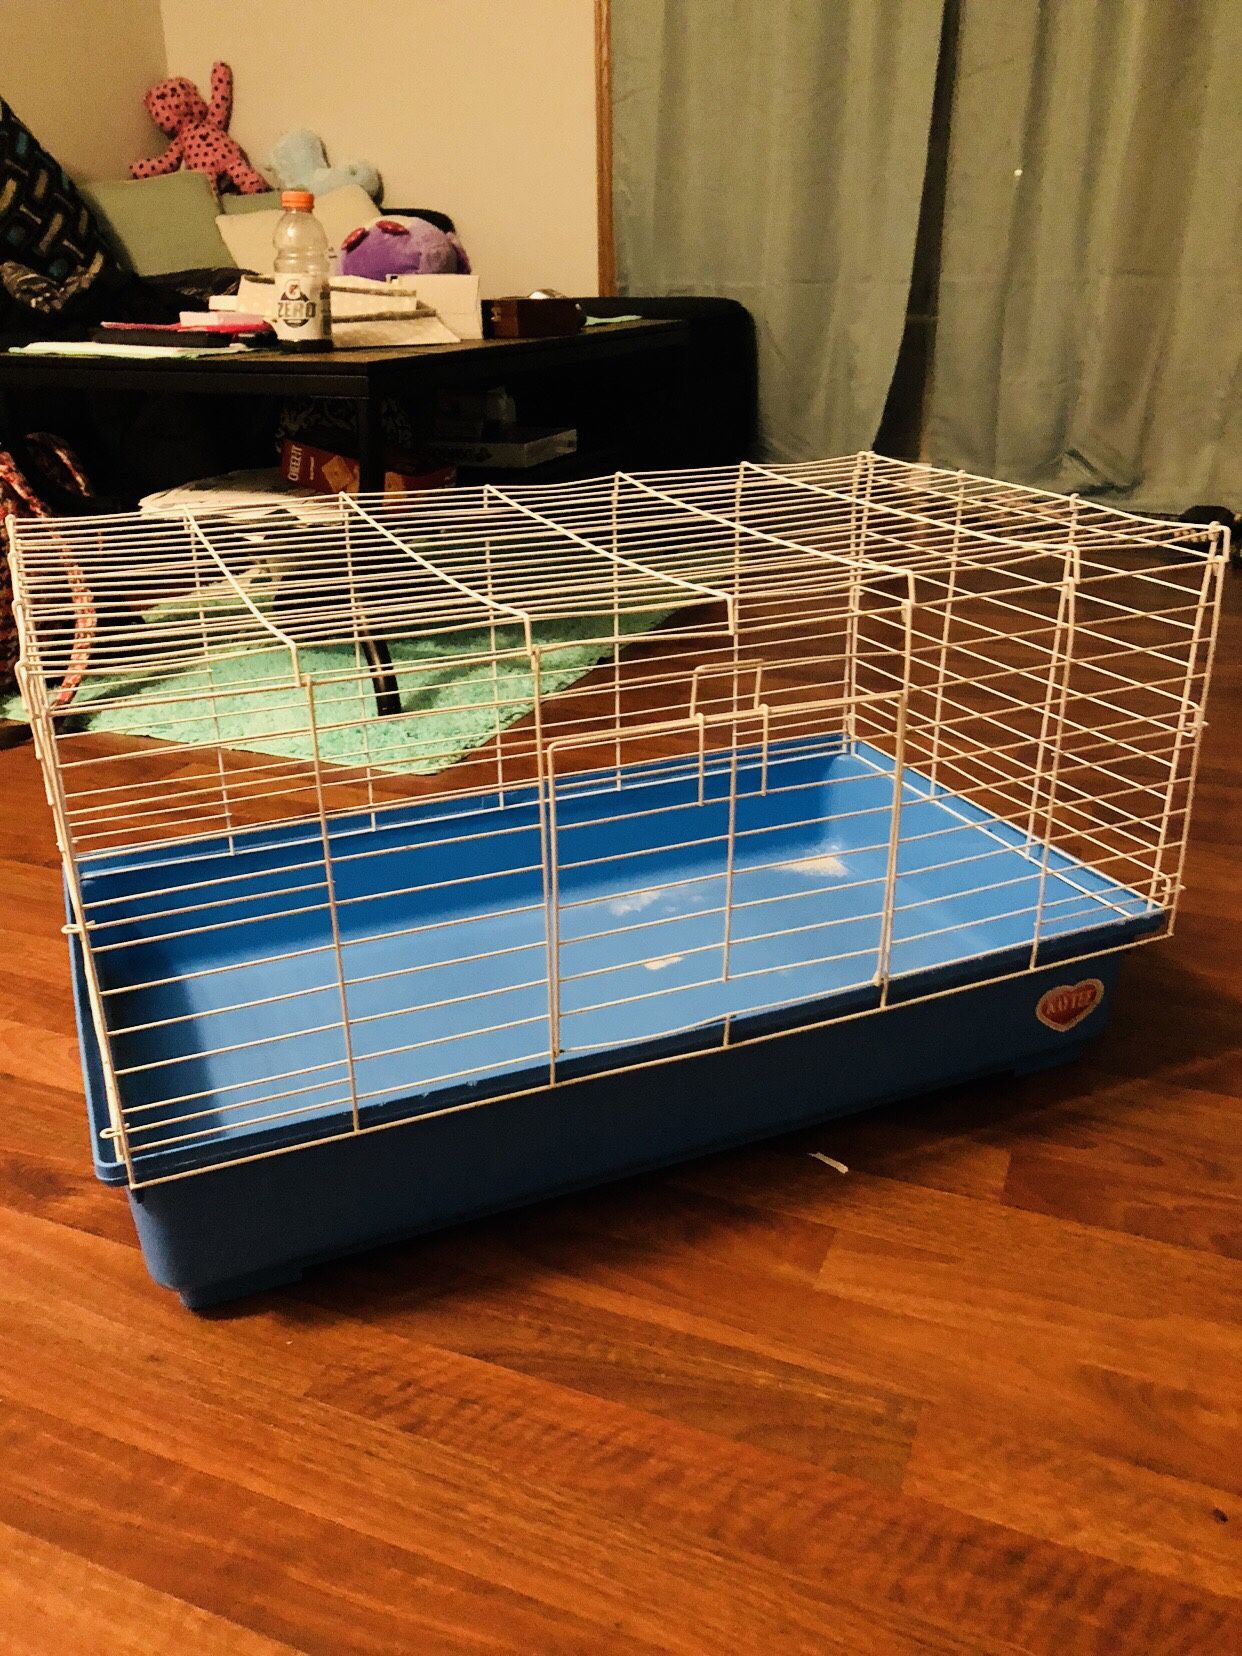 Cage for rabbit or guinea pig